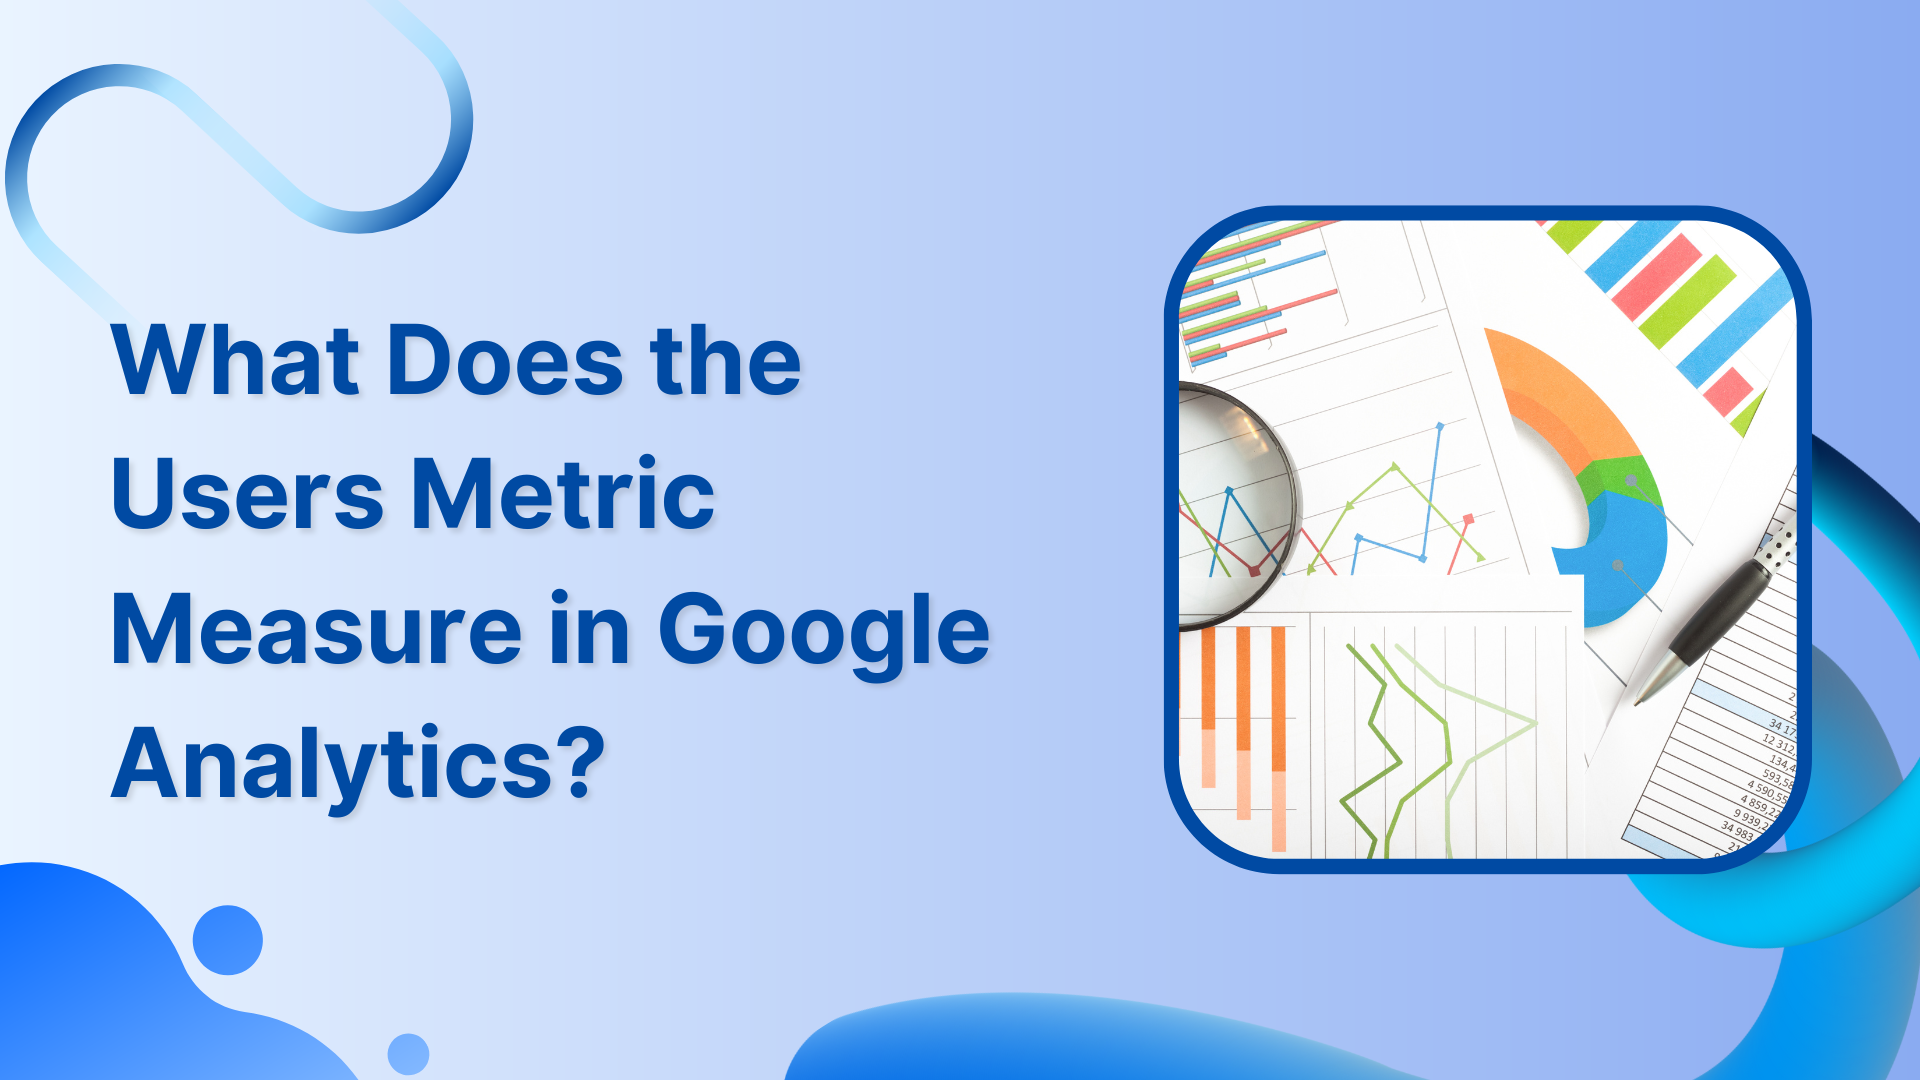 What Does the Users Metric Measure in Google Analytics?